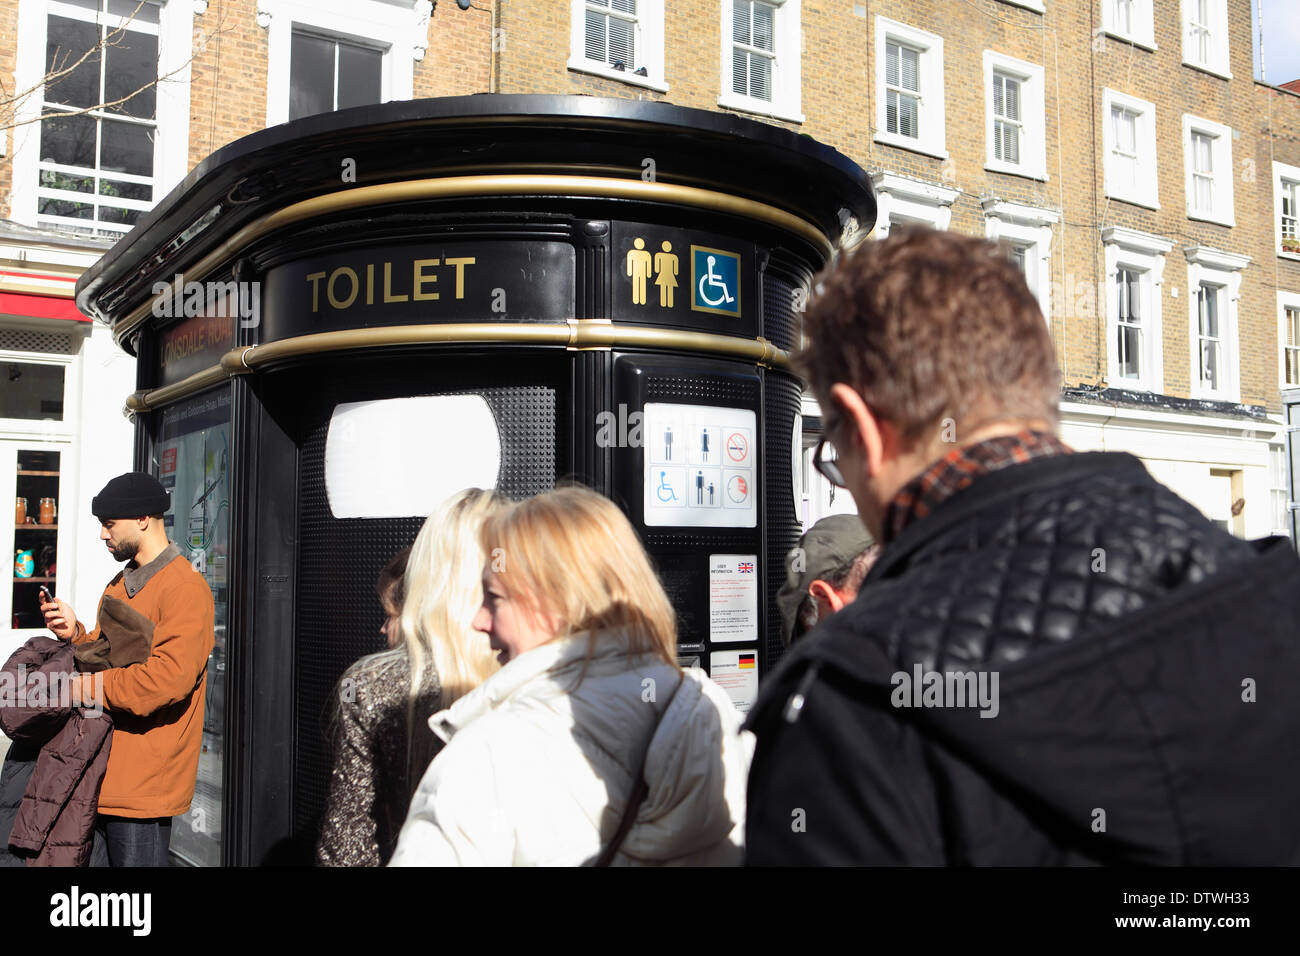 united kingdom london borough of kensington and chelsea lonsdale road queuing for a public toilet Stock Photo